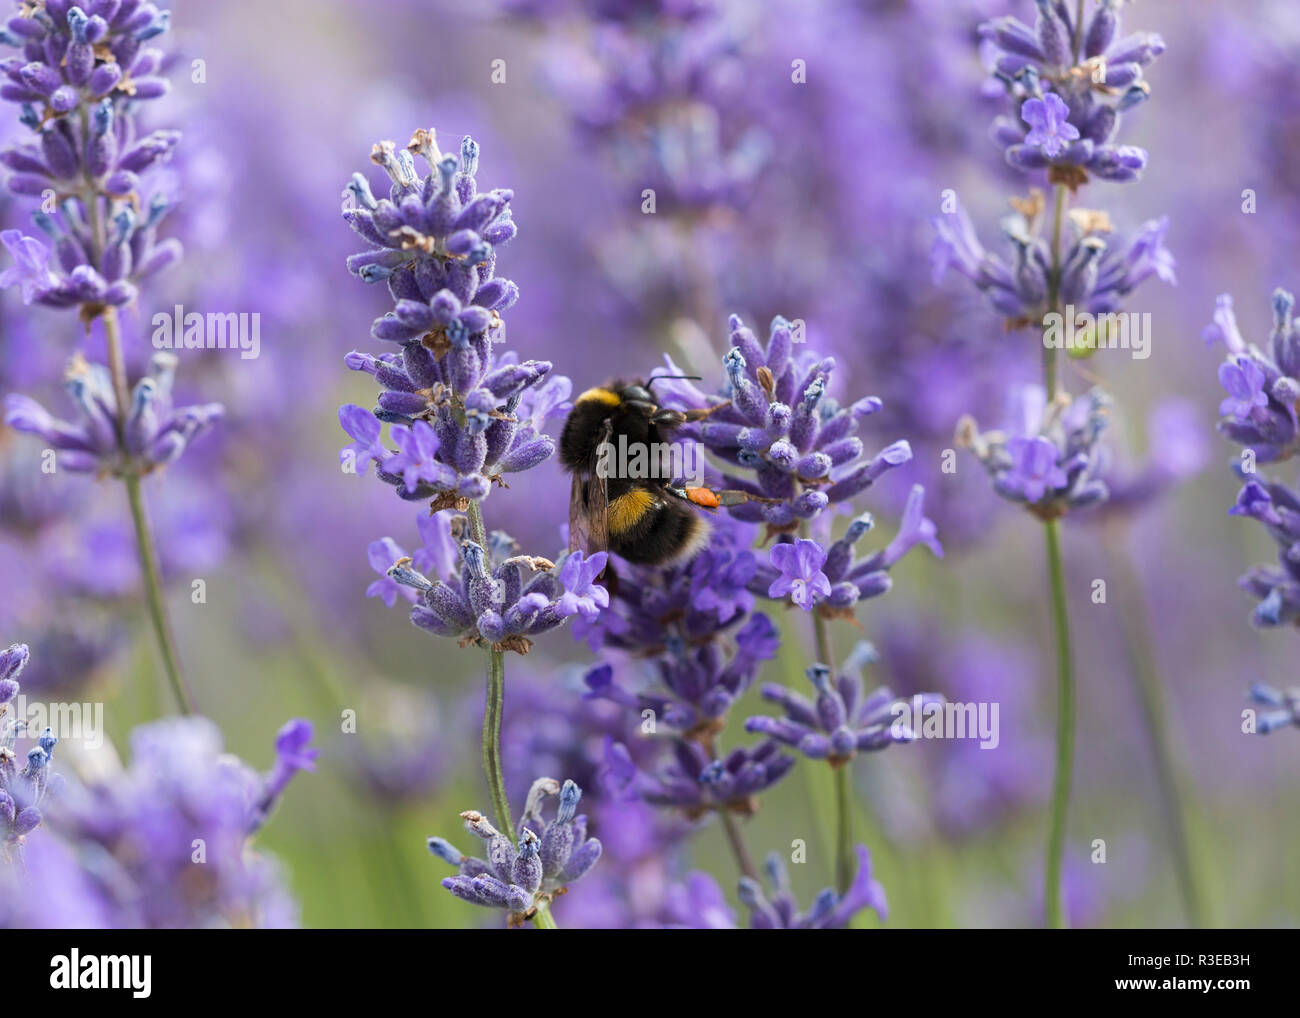 Bee on lavender flowers, close up Stock Photo